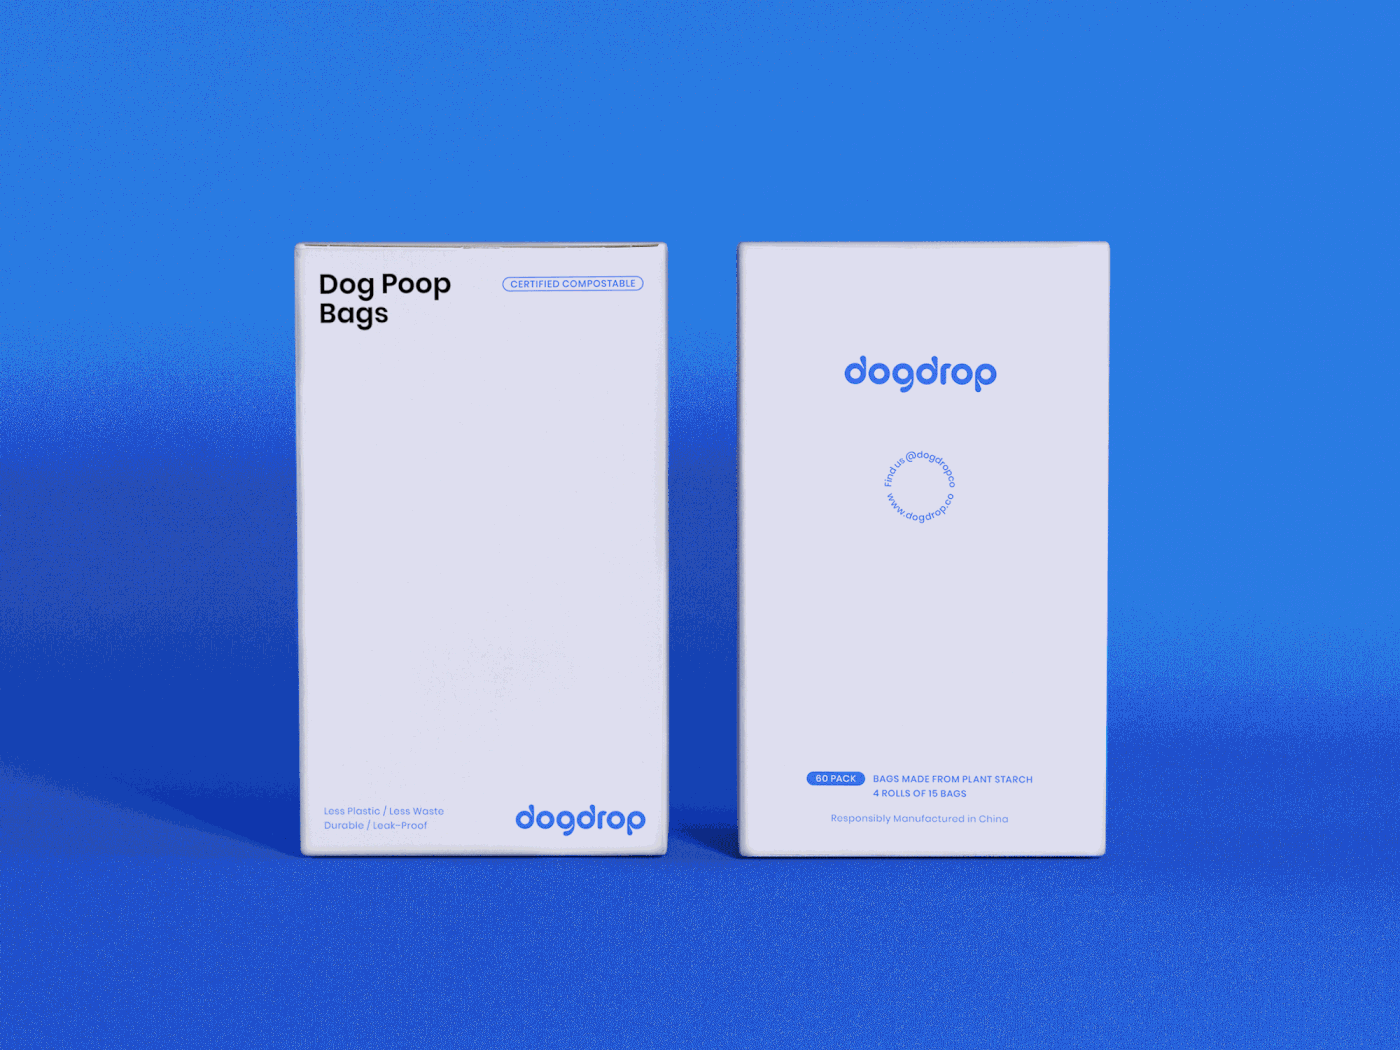 Packaging example #610: The Dogdrop's Packaging